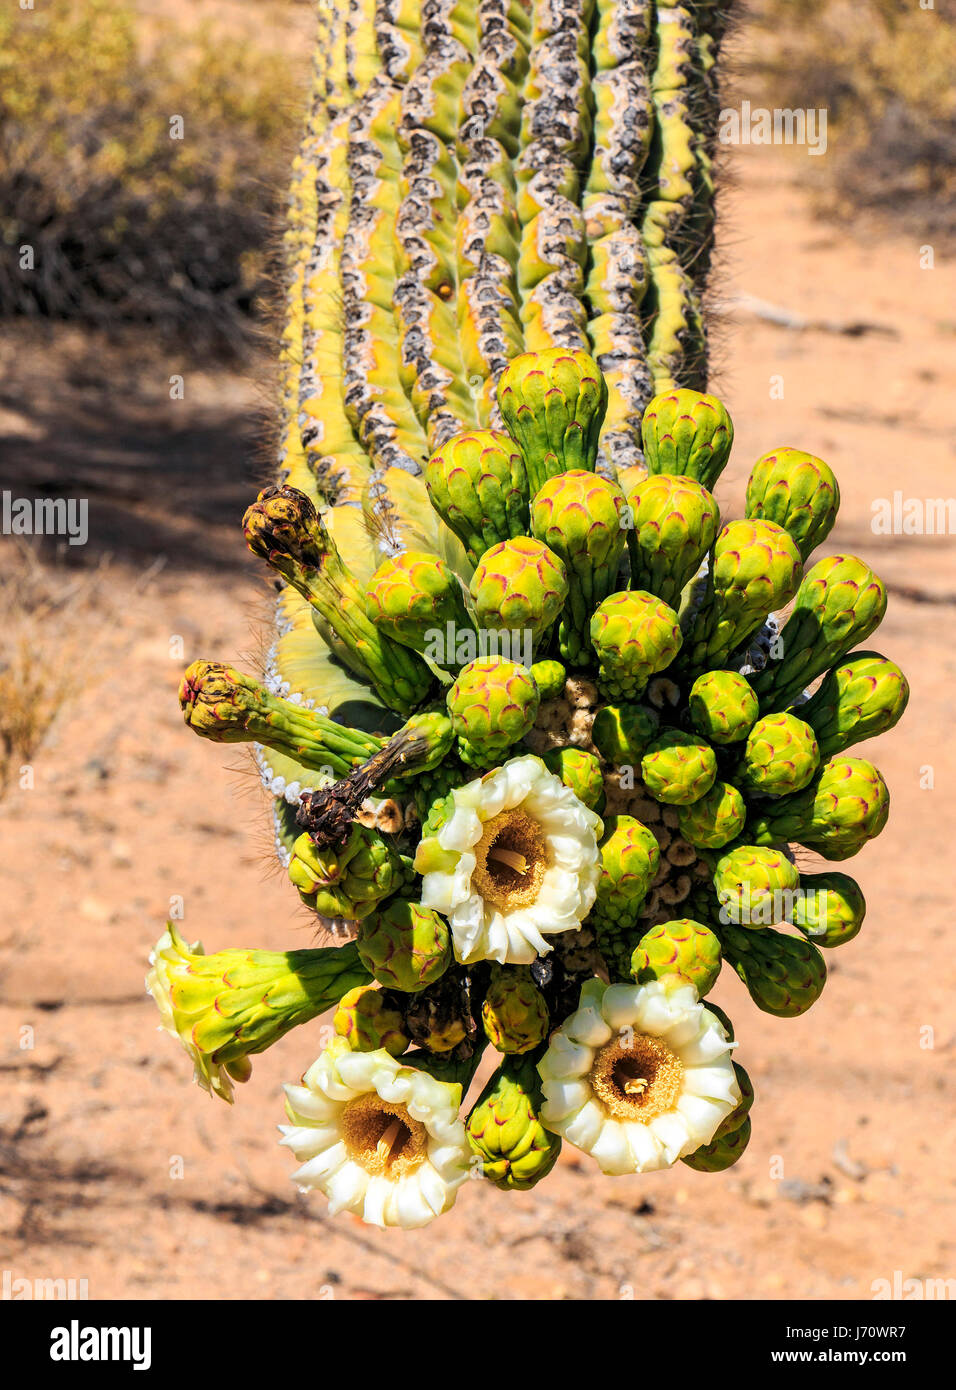 Cactus flowers bloom on saguaro cactus. The saguaro is a tree-like cactus that can grow to be over 70 feet (21 m) tall. It is native to the Sonoran De Stock Photo